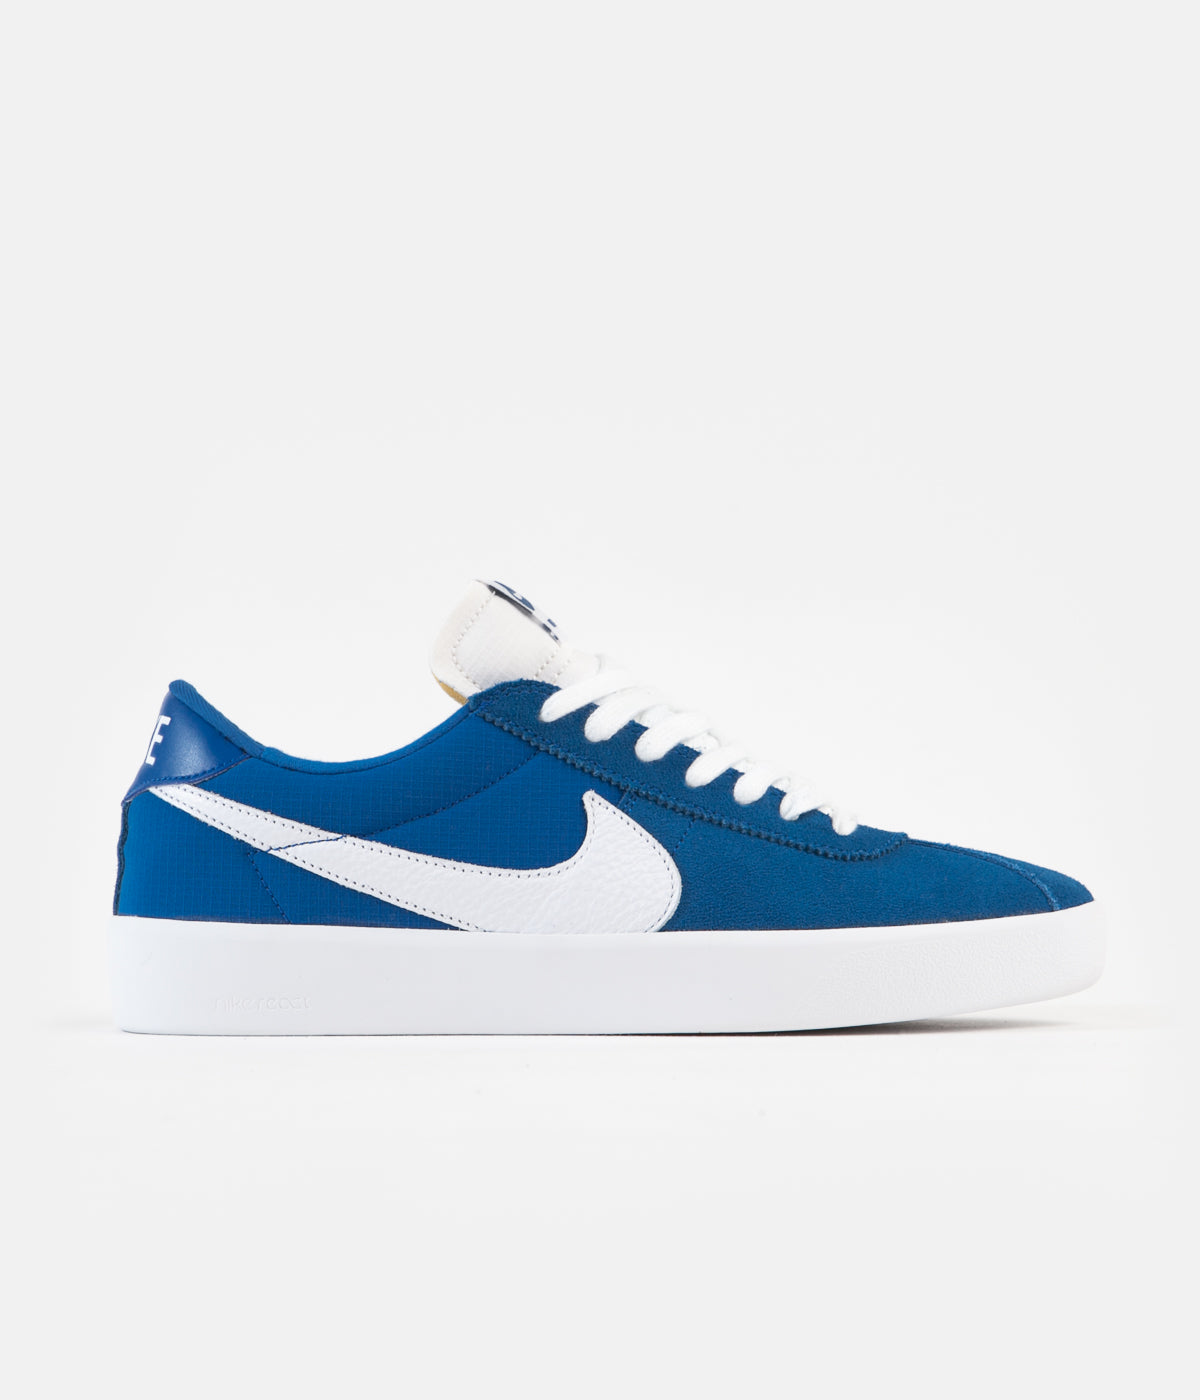 Apgs-nswShops Team / White - Nike SB Bruin React Shoes - Team Royal - nike court traditional shoe black and grey color White